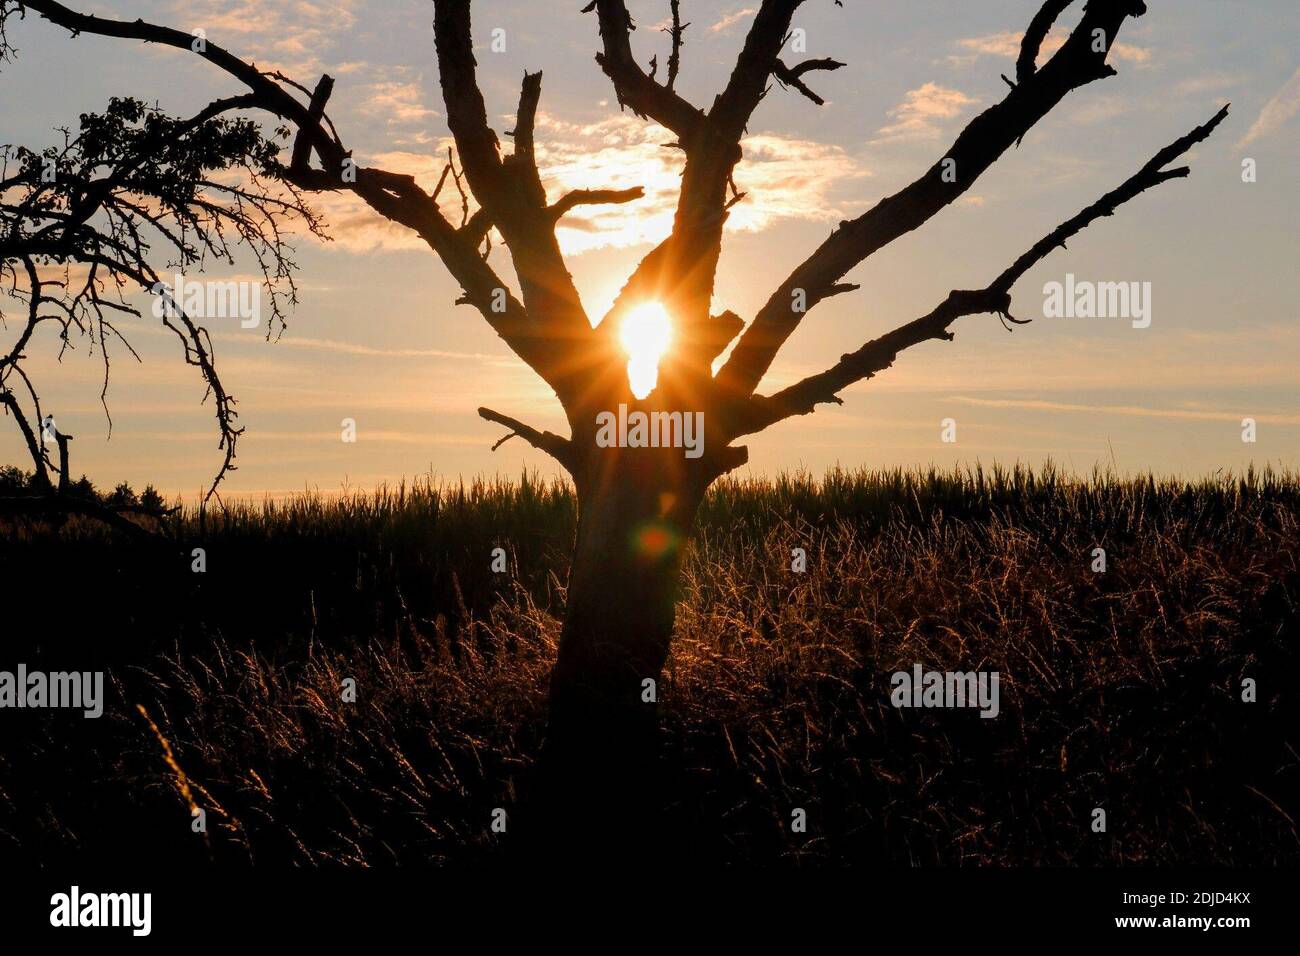 Silhouette Bare Tree On Field Against Sky Stock Photo